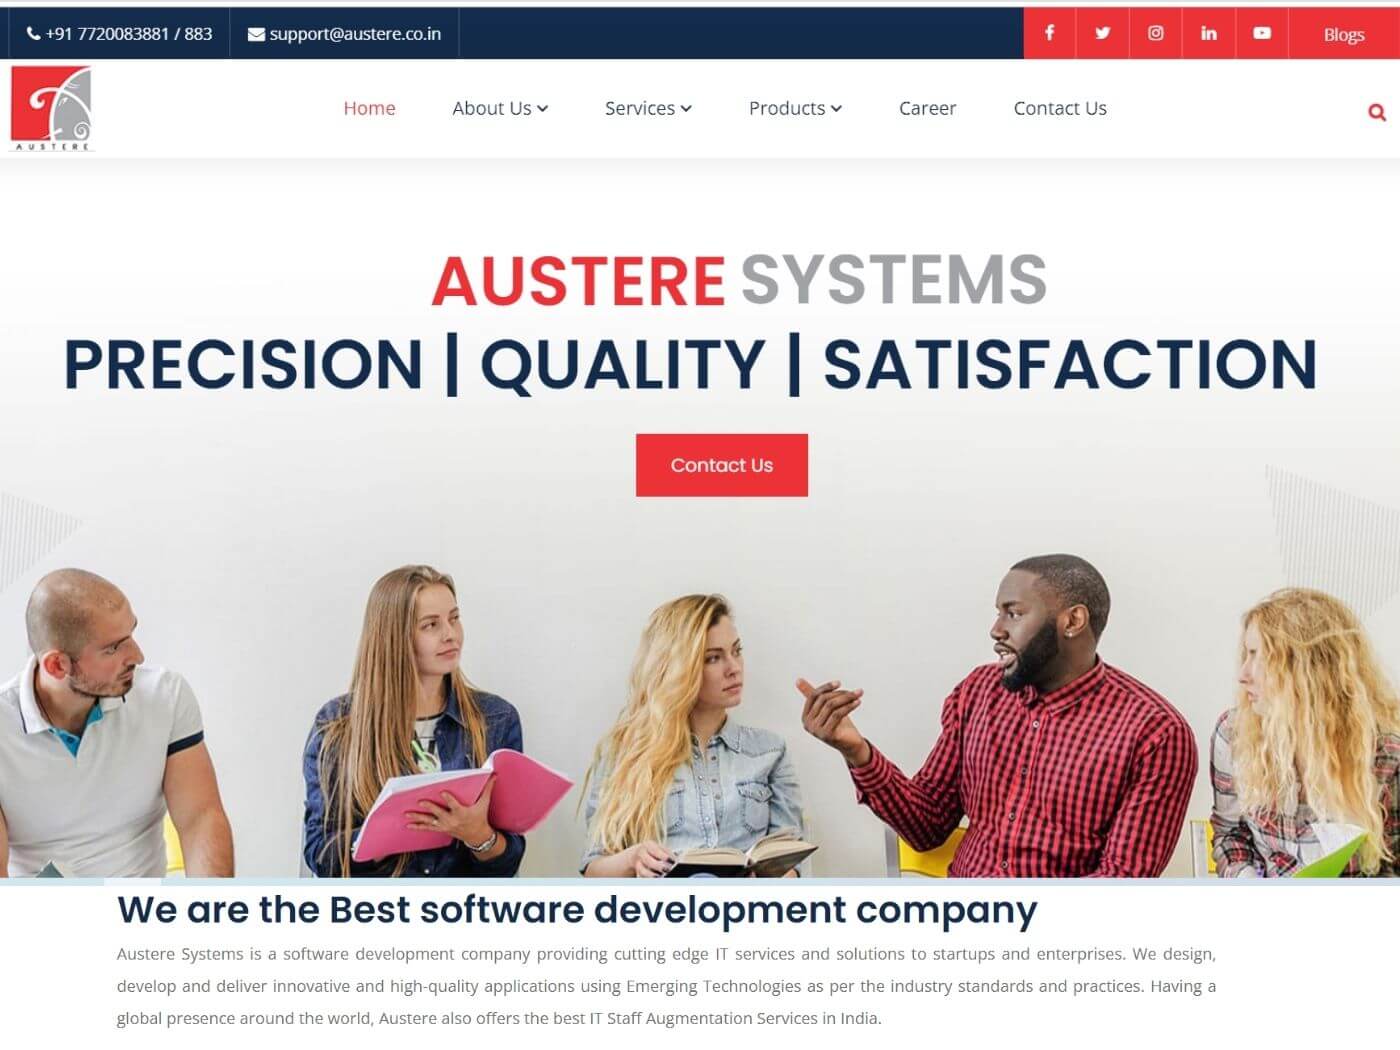 Austere Systems